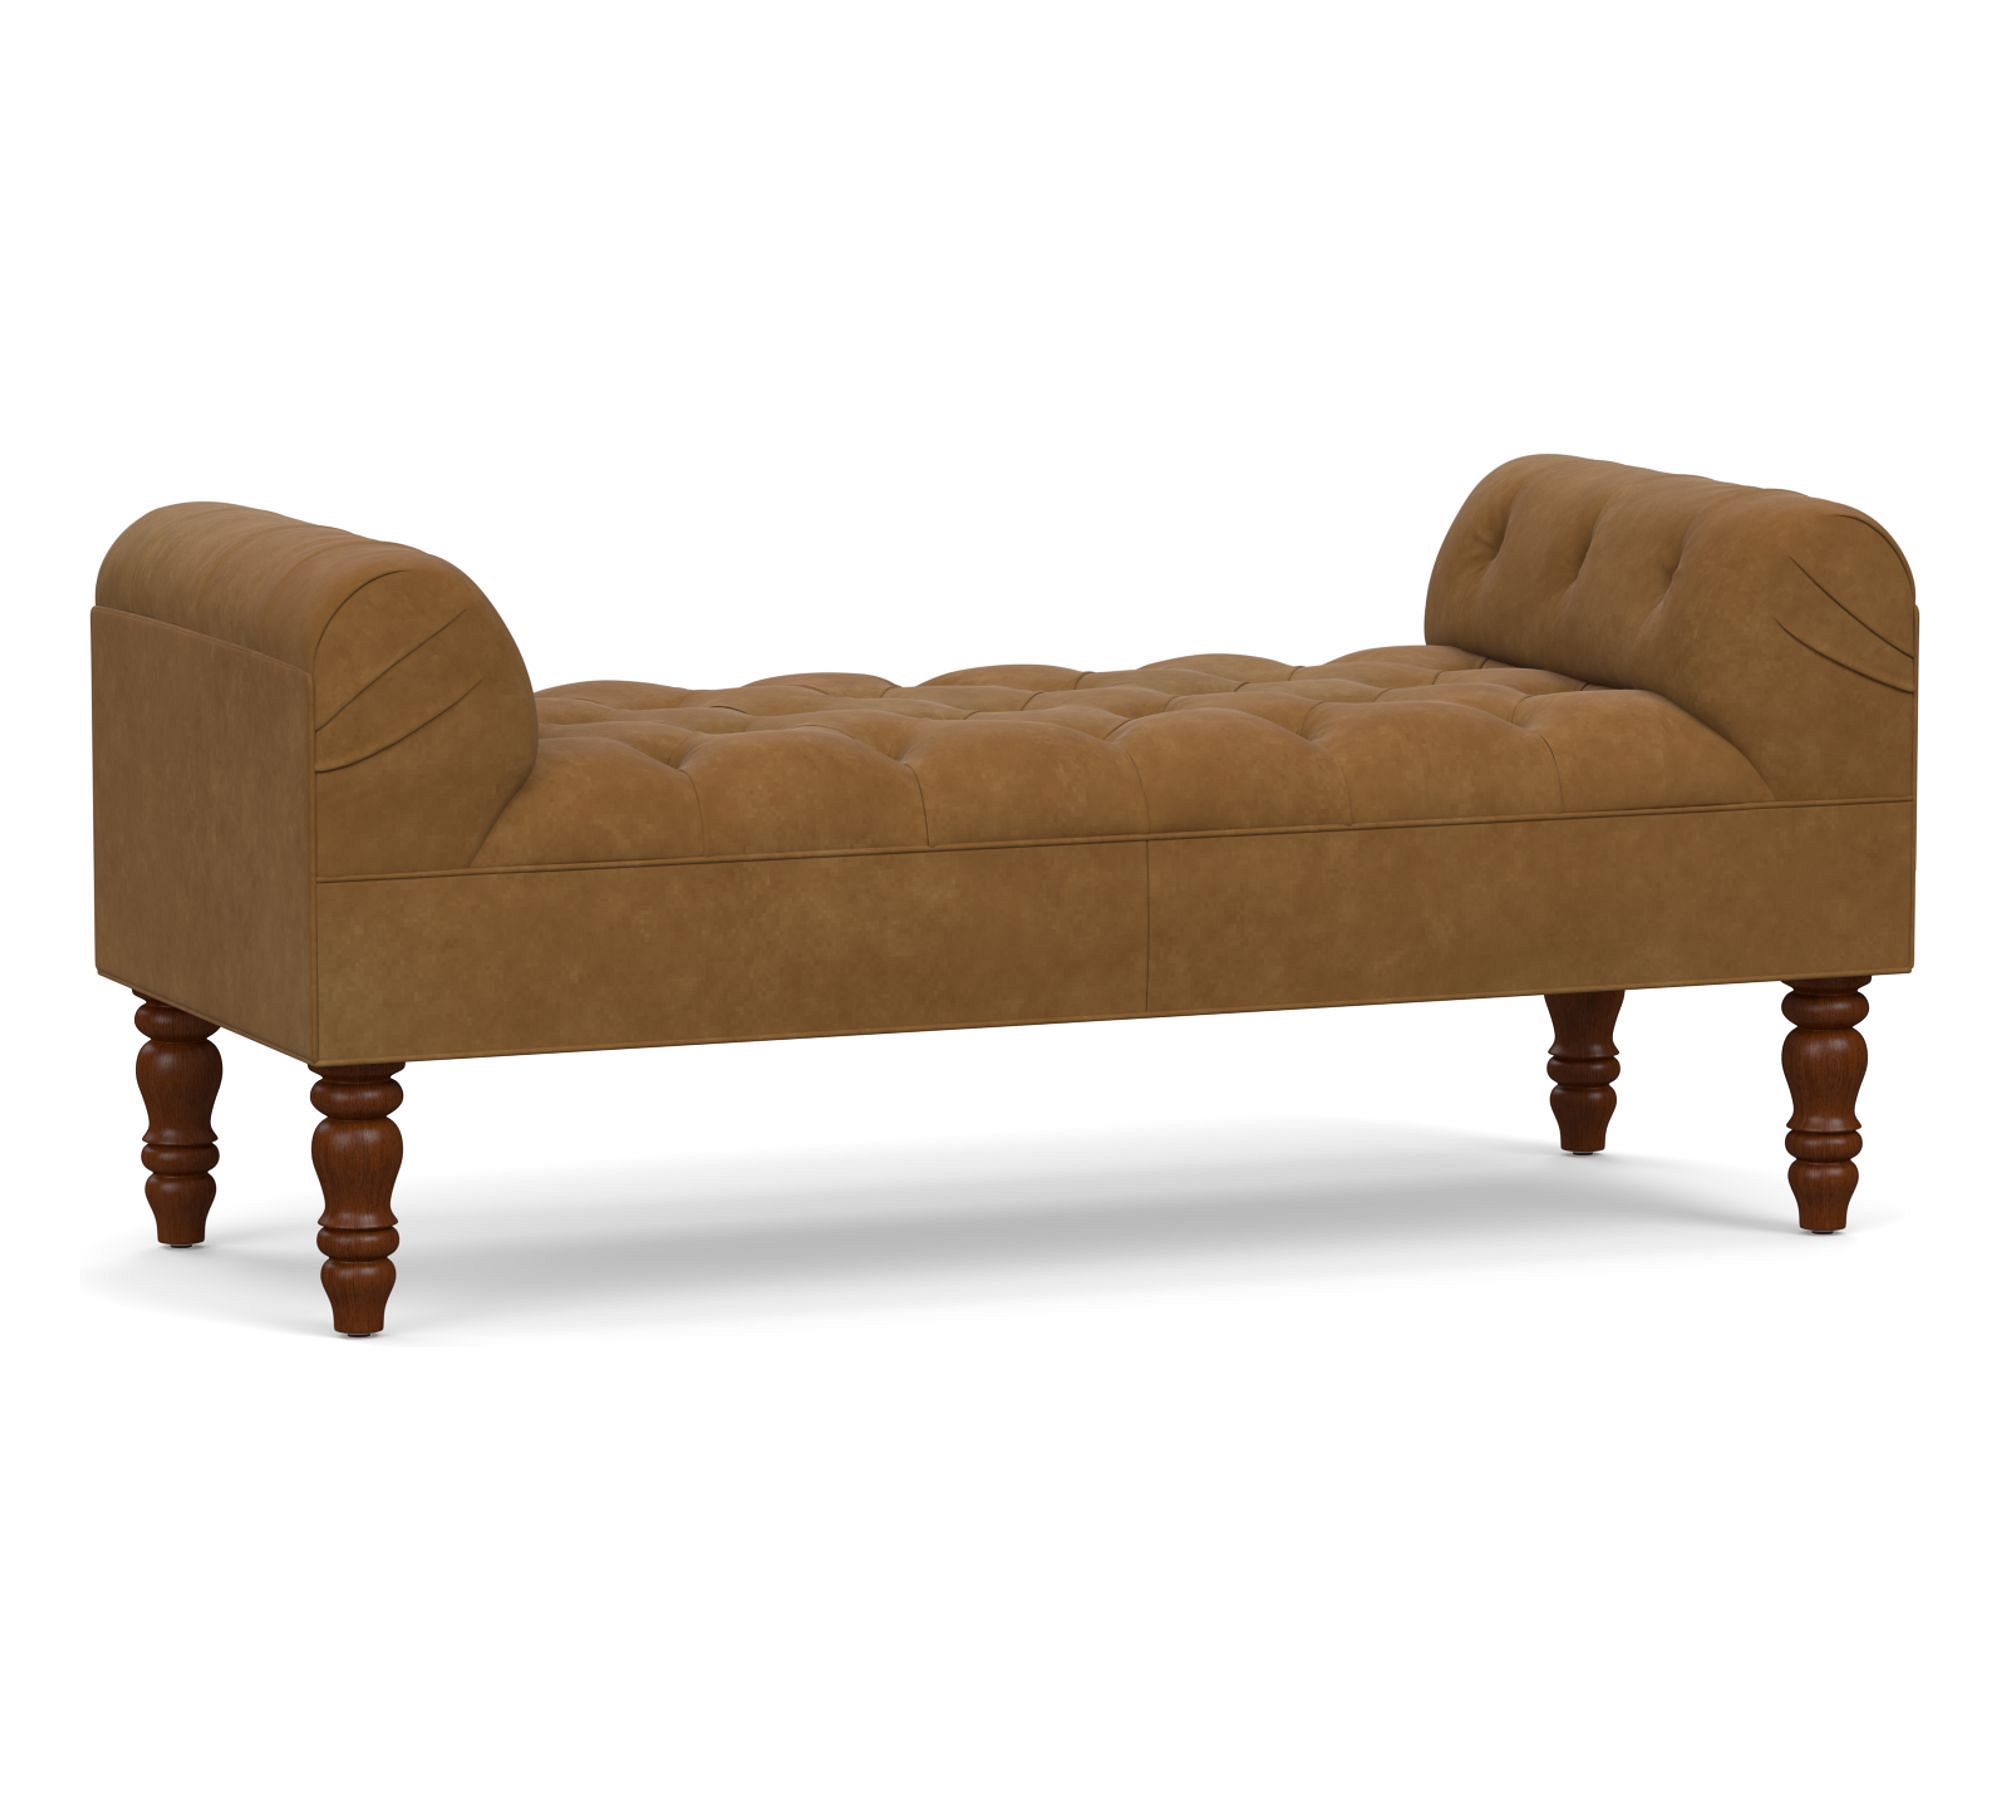 Lorraine Tufted Leather Bench (55.5")